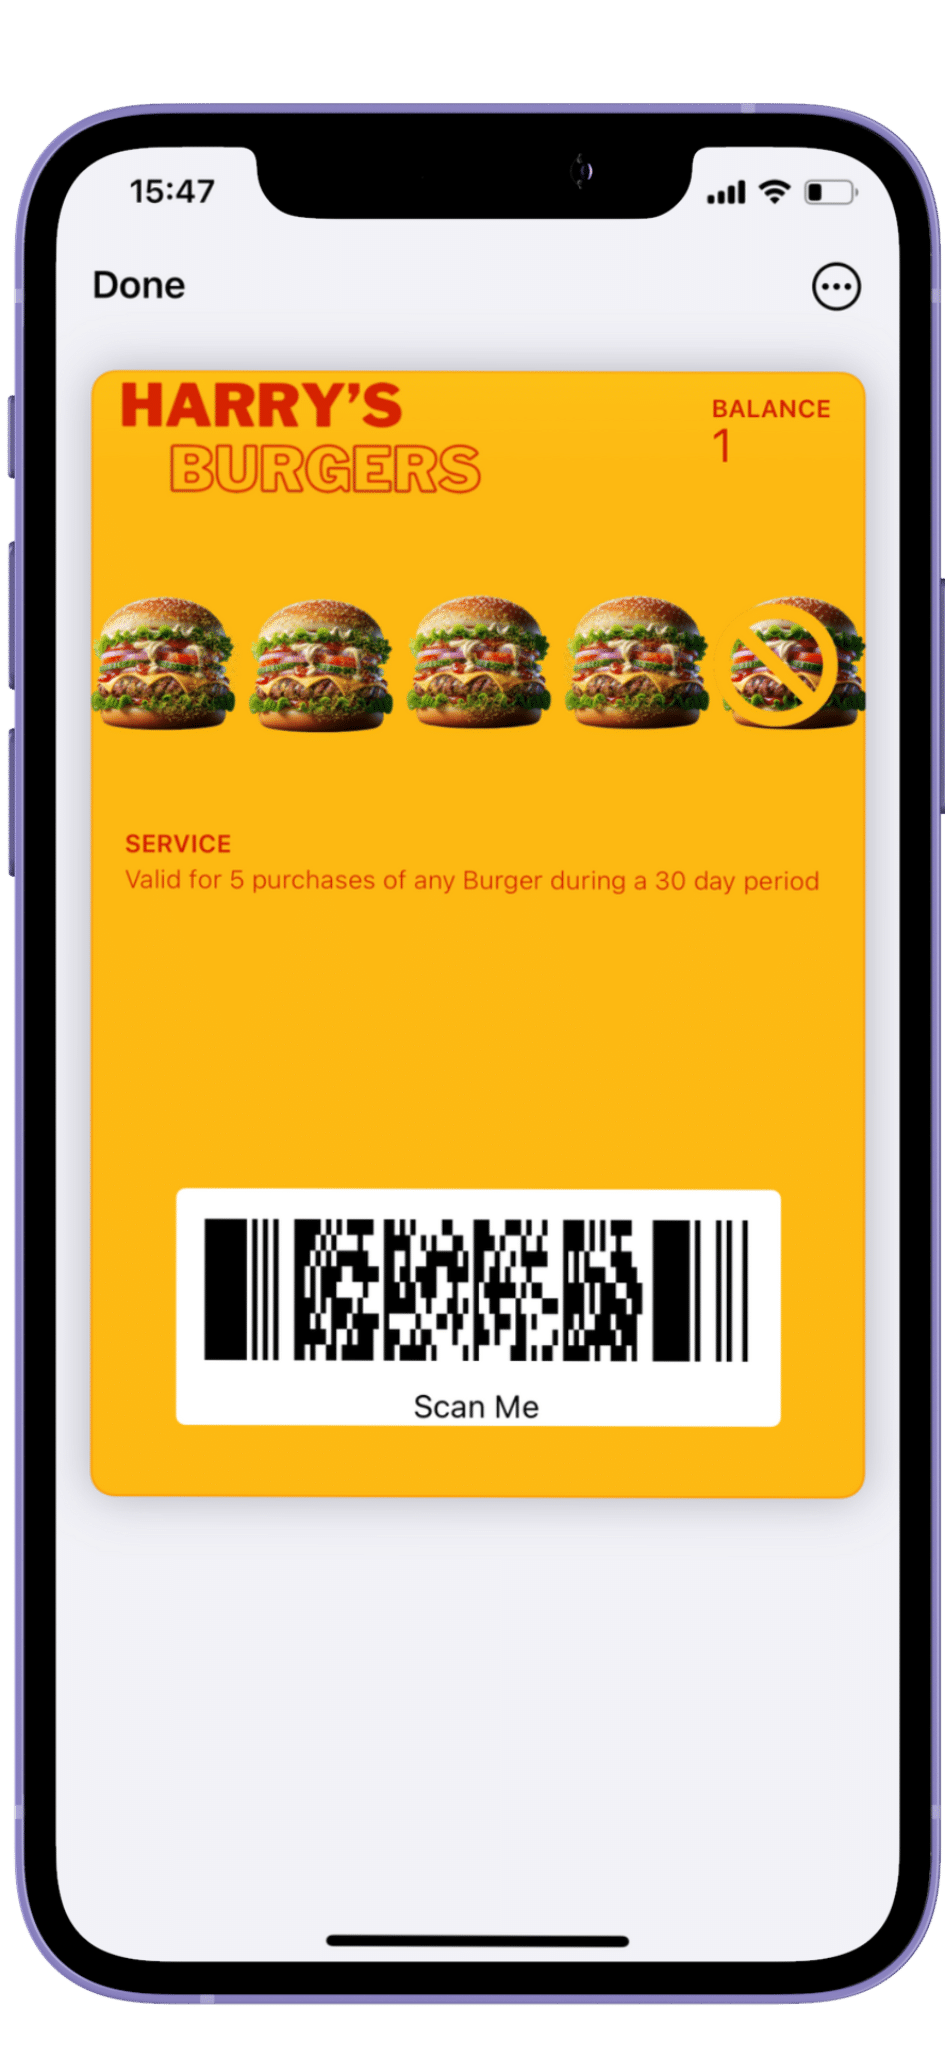 A smartphone displaying a digital loyalty card for harry's burgers with a barcode to be scanned for service offers.